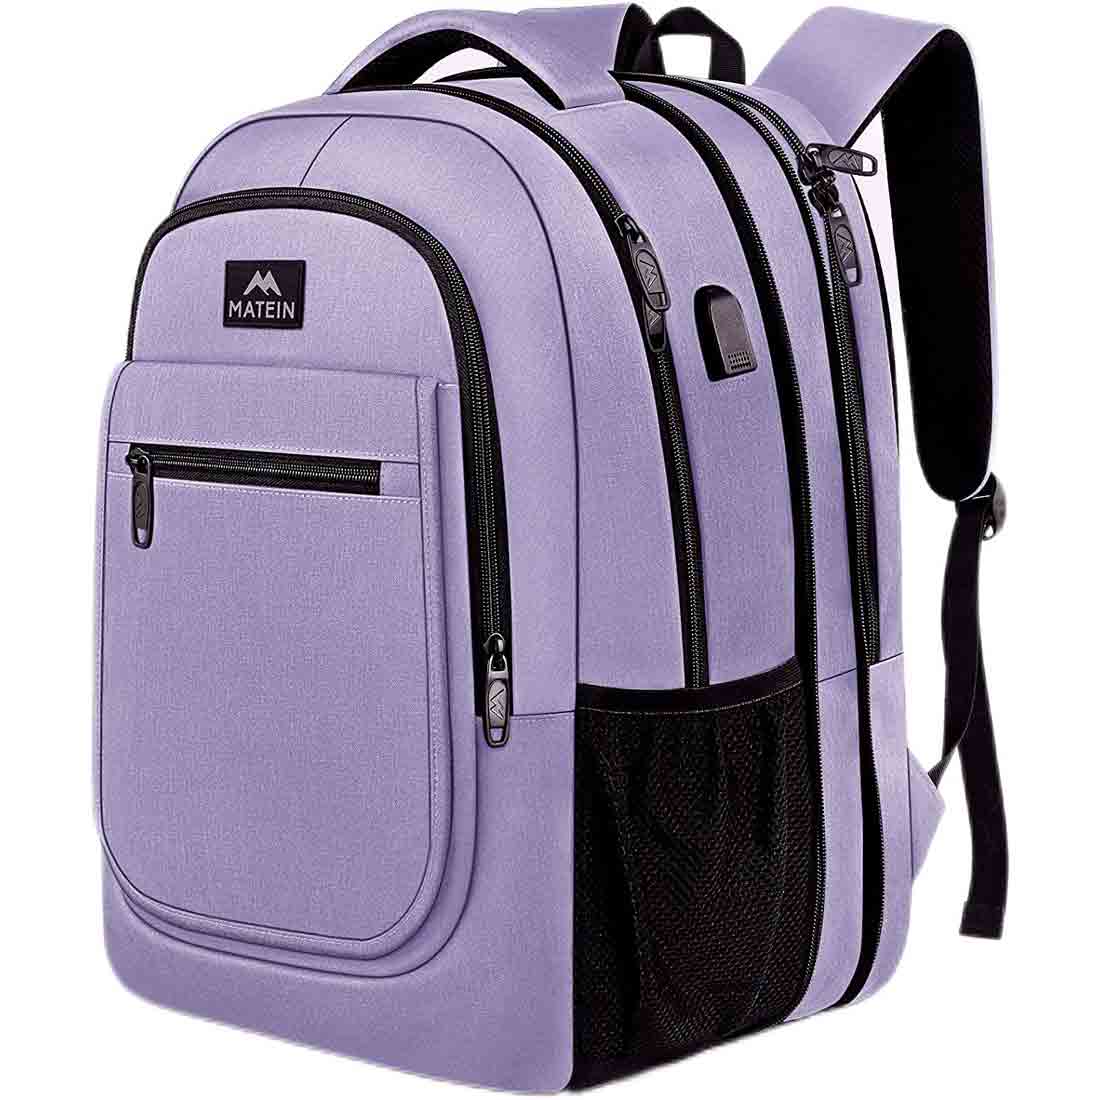 College Backpack Bookbag Travel Expandable Laptop Matein